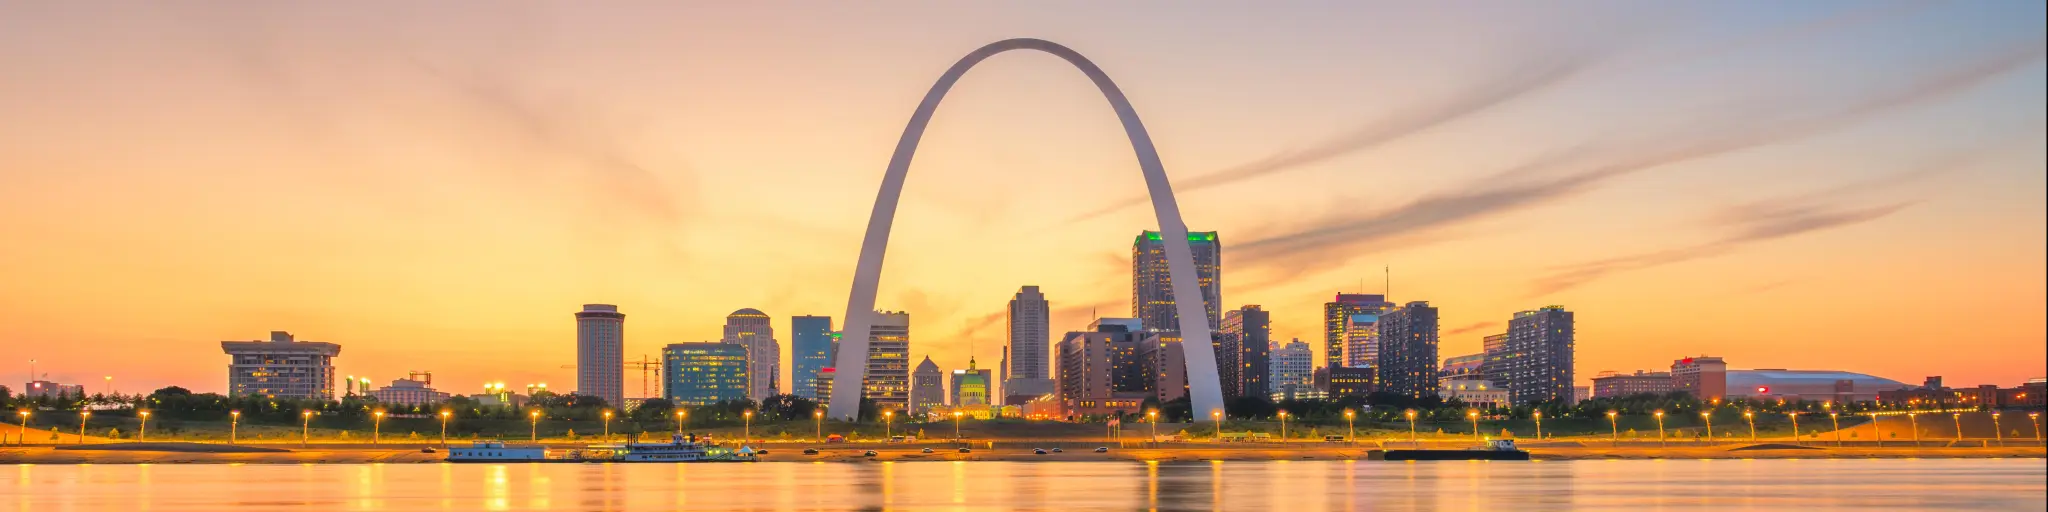 A sunset shot of the cityscape of St Louis with the famous arch in the foreground, overlooking water